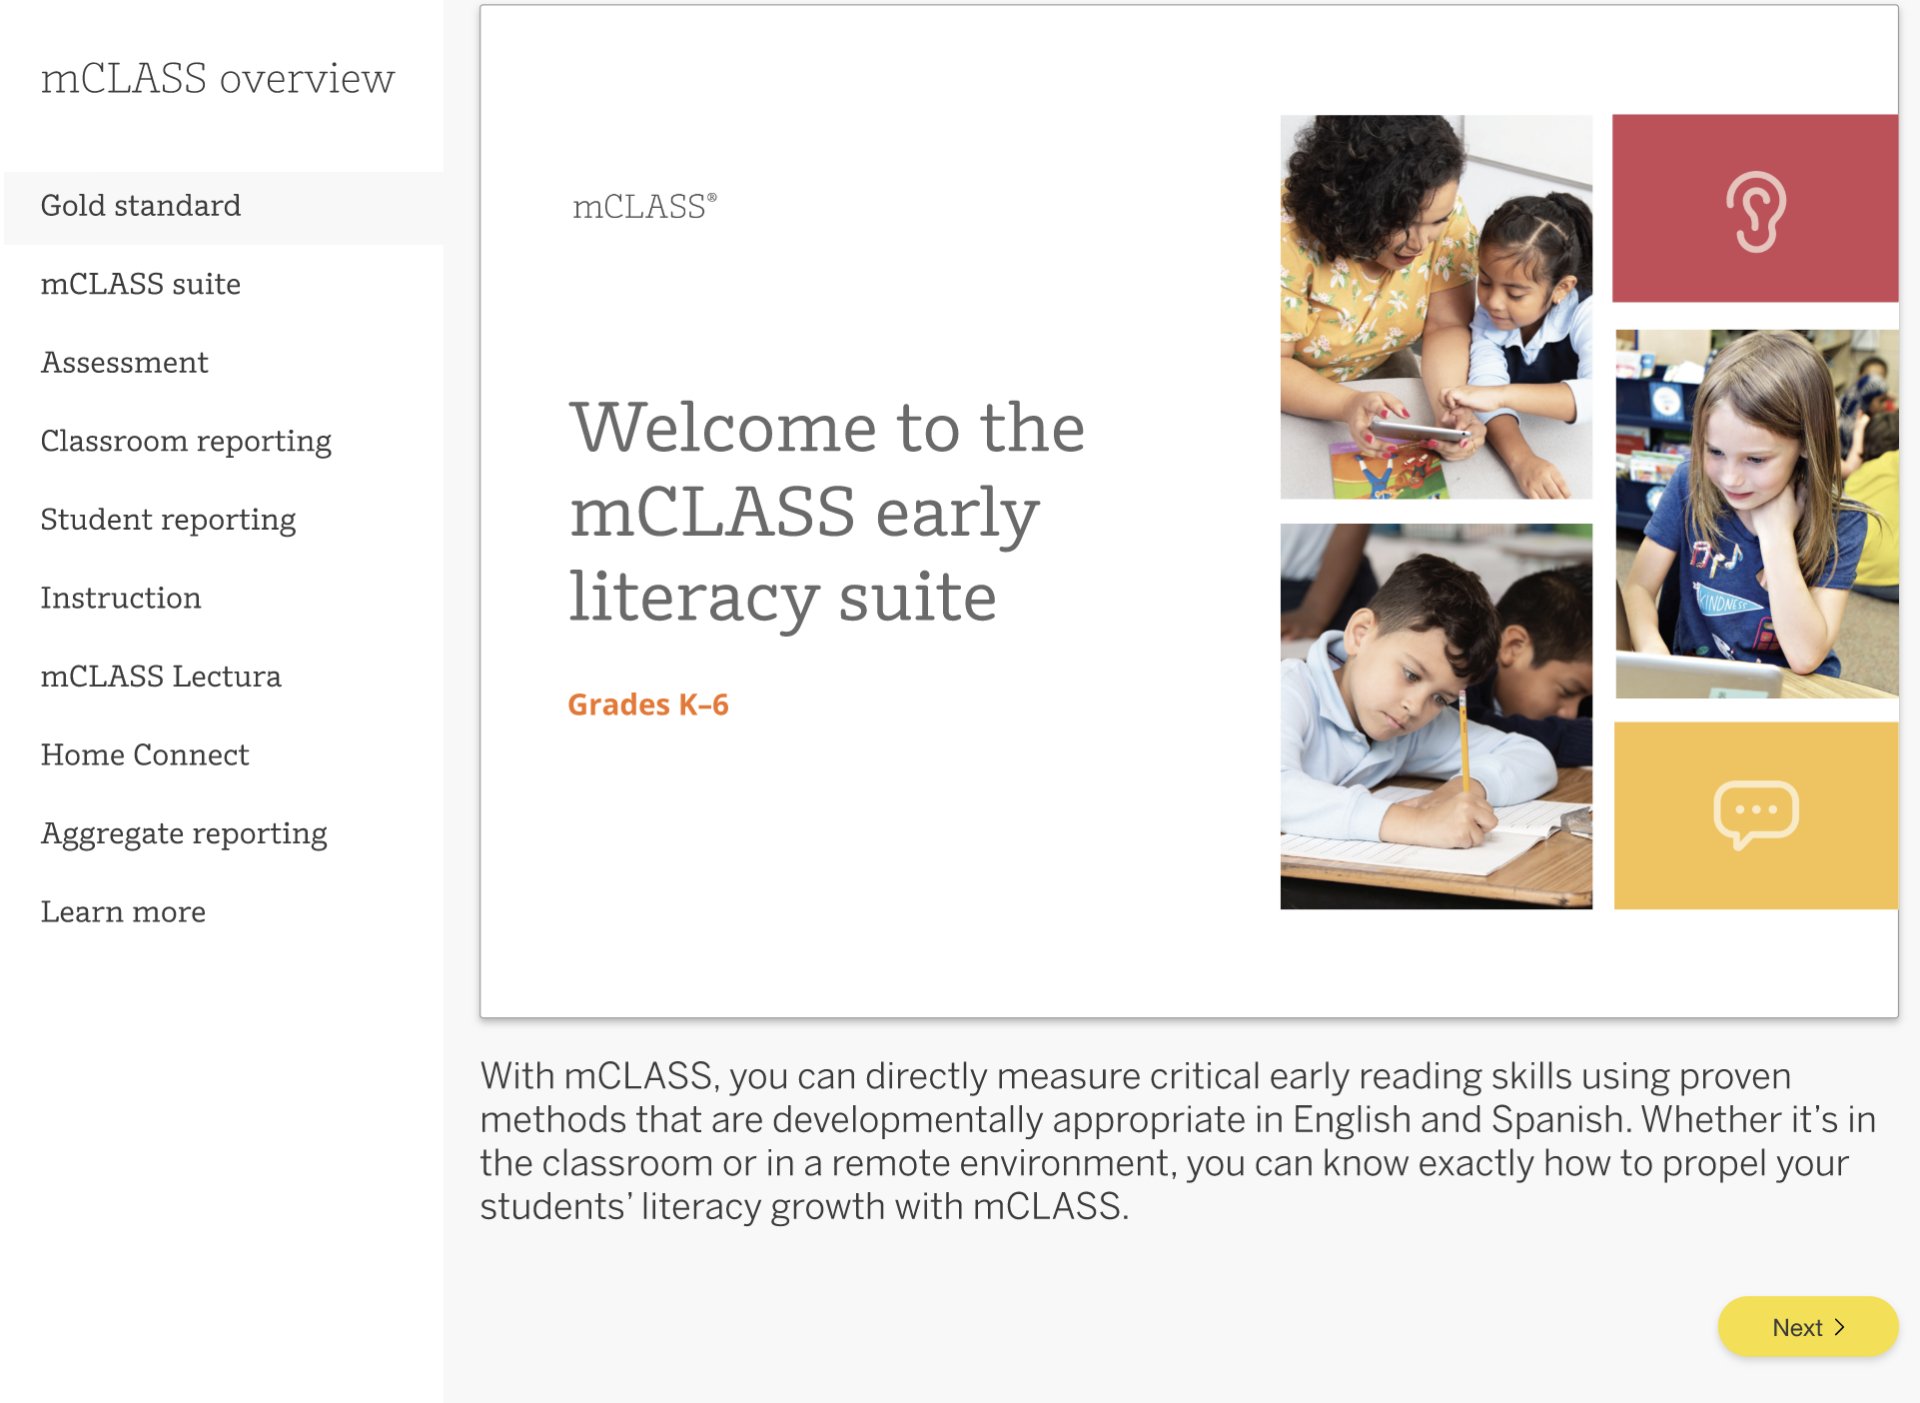 A promotional graphic for mclass literacy suite describing benefits for grades k-6, featuring text and images of children engaging in classroom activities.